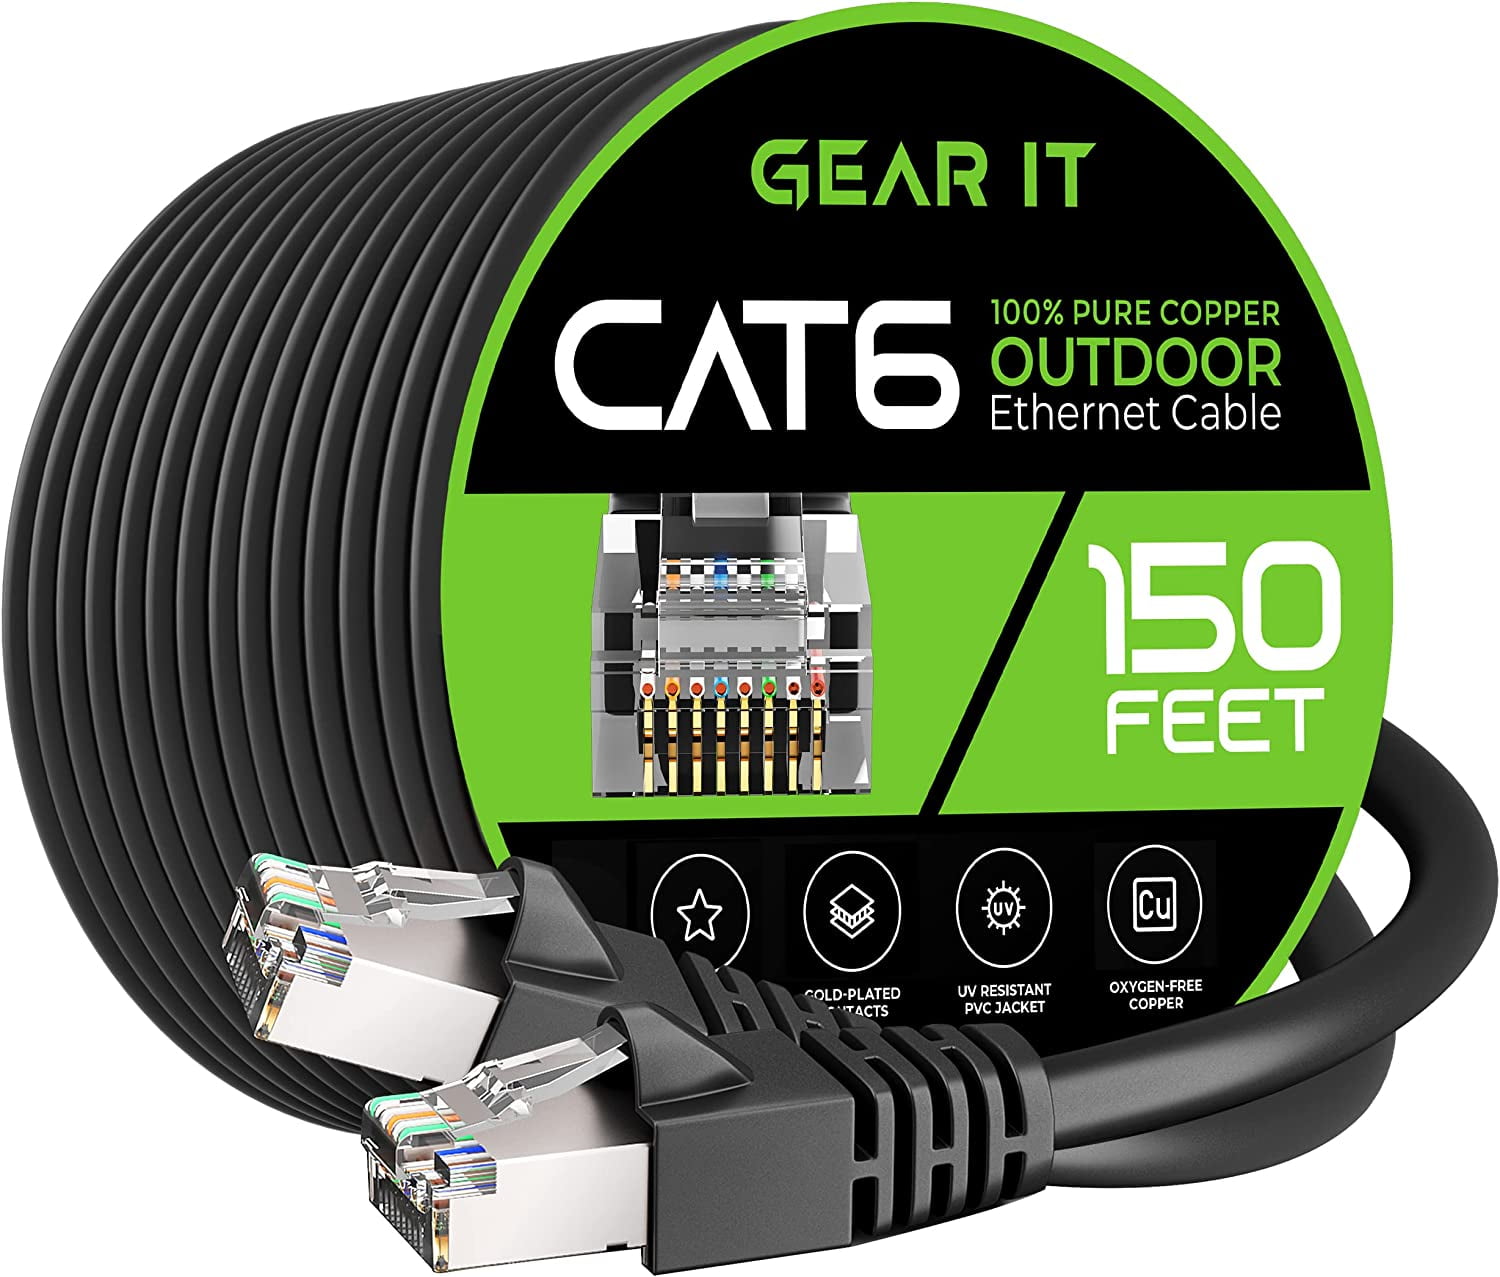 GearIT Cat6 Outdoor Ethernet Cable (50ft) 23AWG Pure Copper, FTP, LLDPE,  Waterproof, Direct Burial, In-Ground, UV Resistant, POE, Network, Lan,  Internet, Cat 6, Cat6 Cable - 50 Feet 